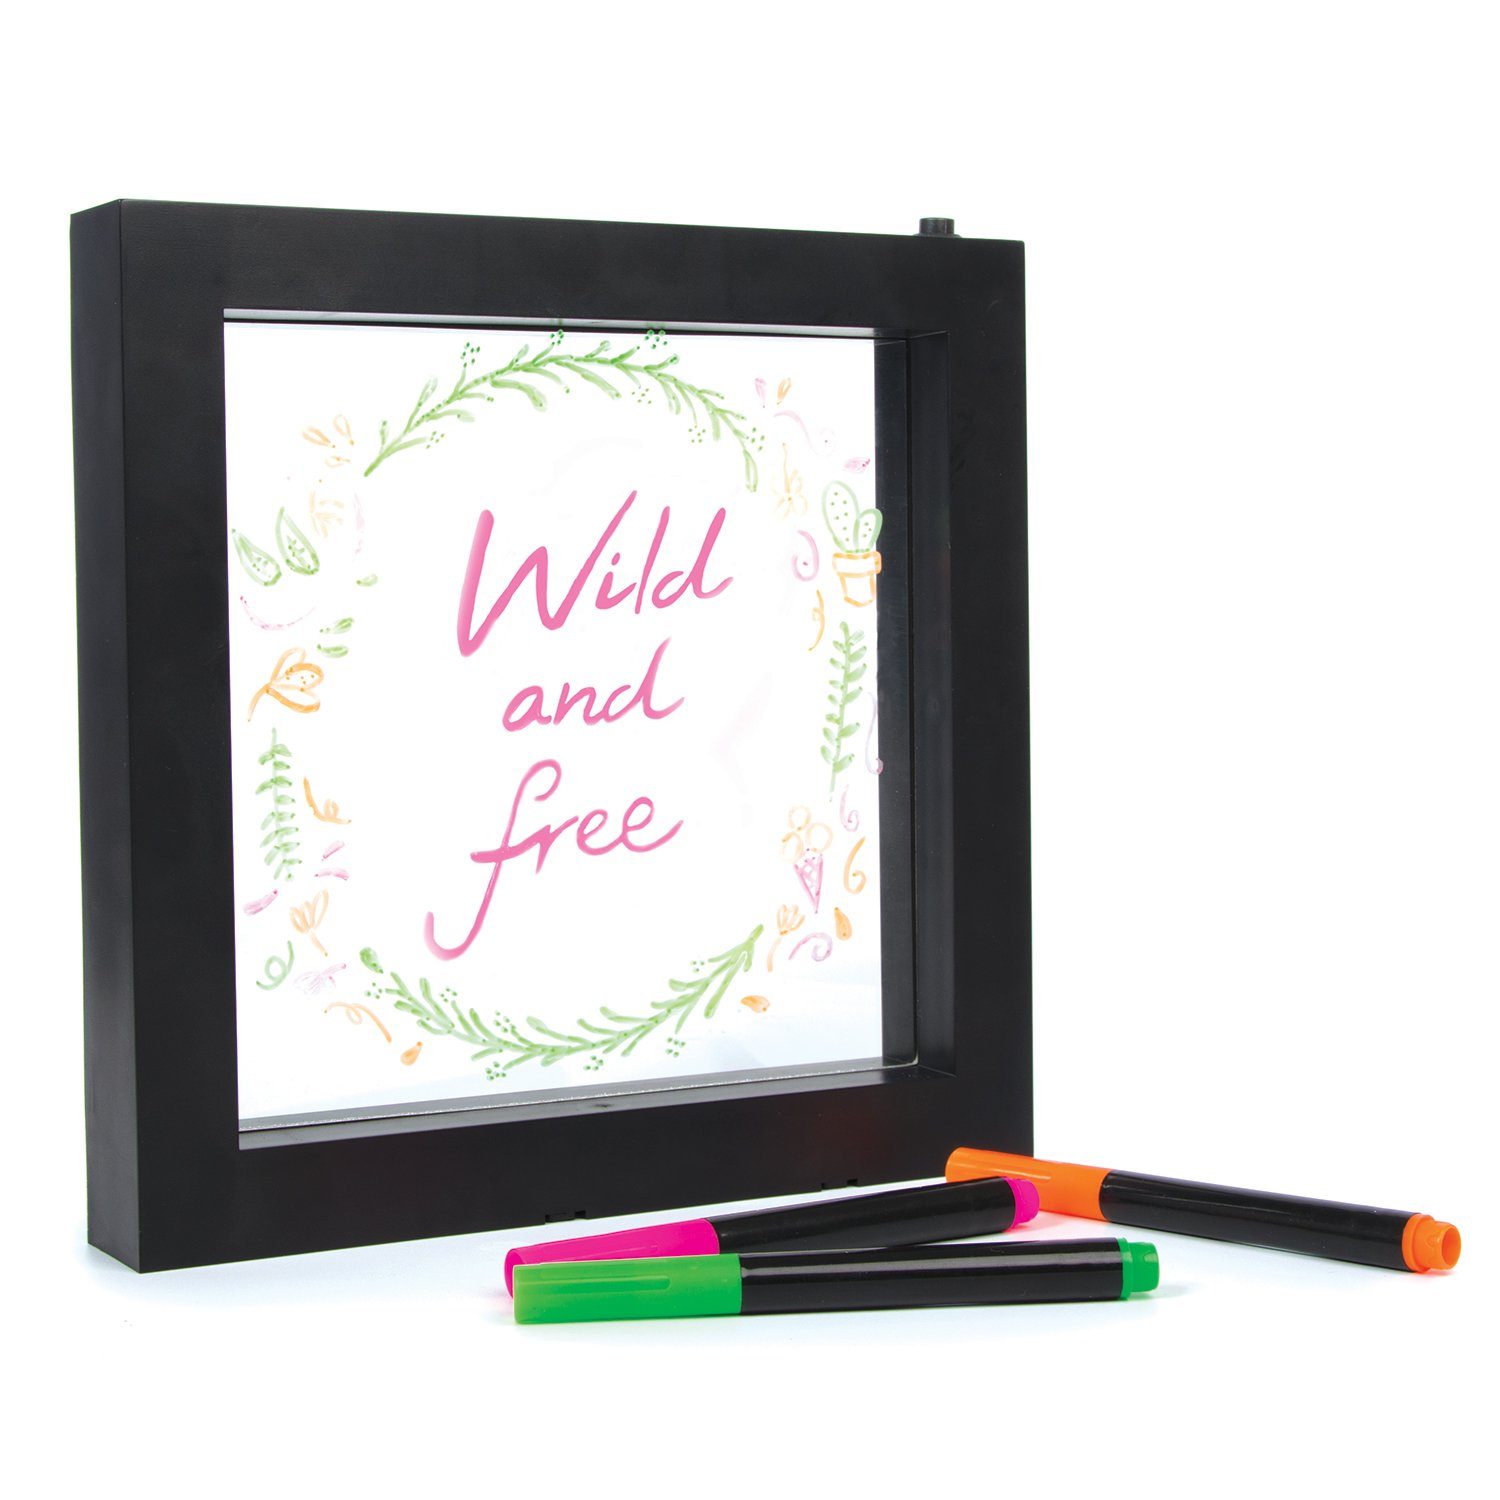 Fizz creations Frame Message Neon Light Up Effect Stehlampe